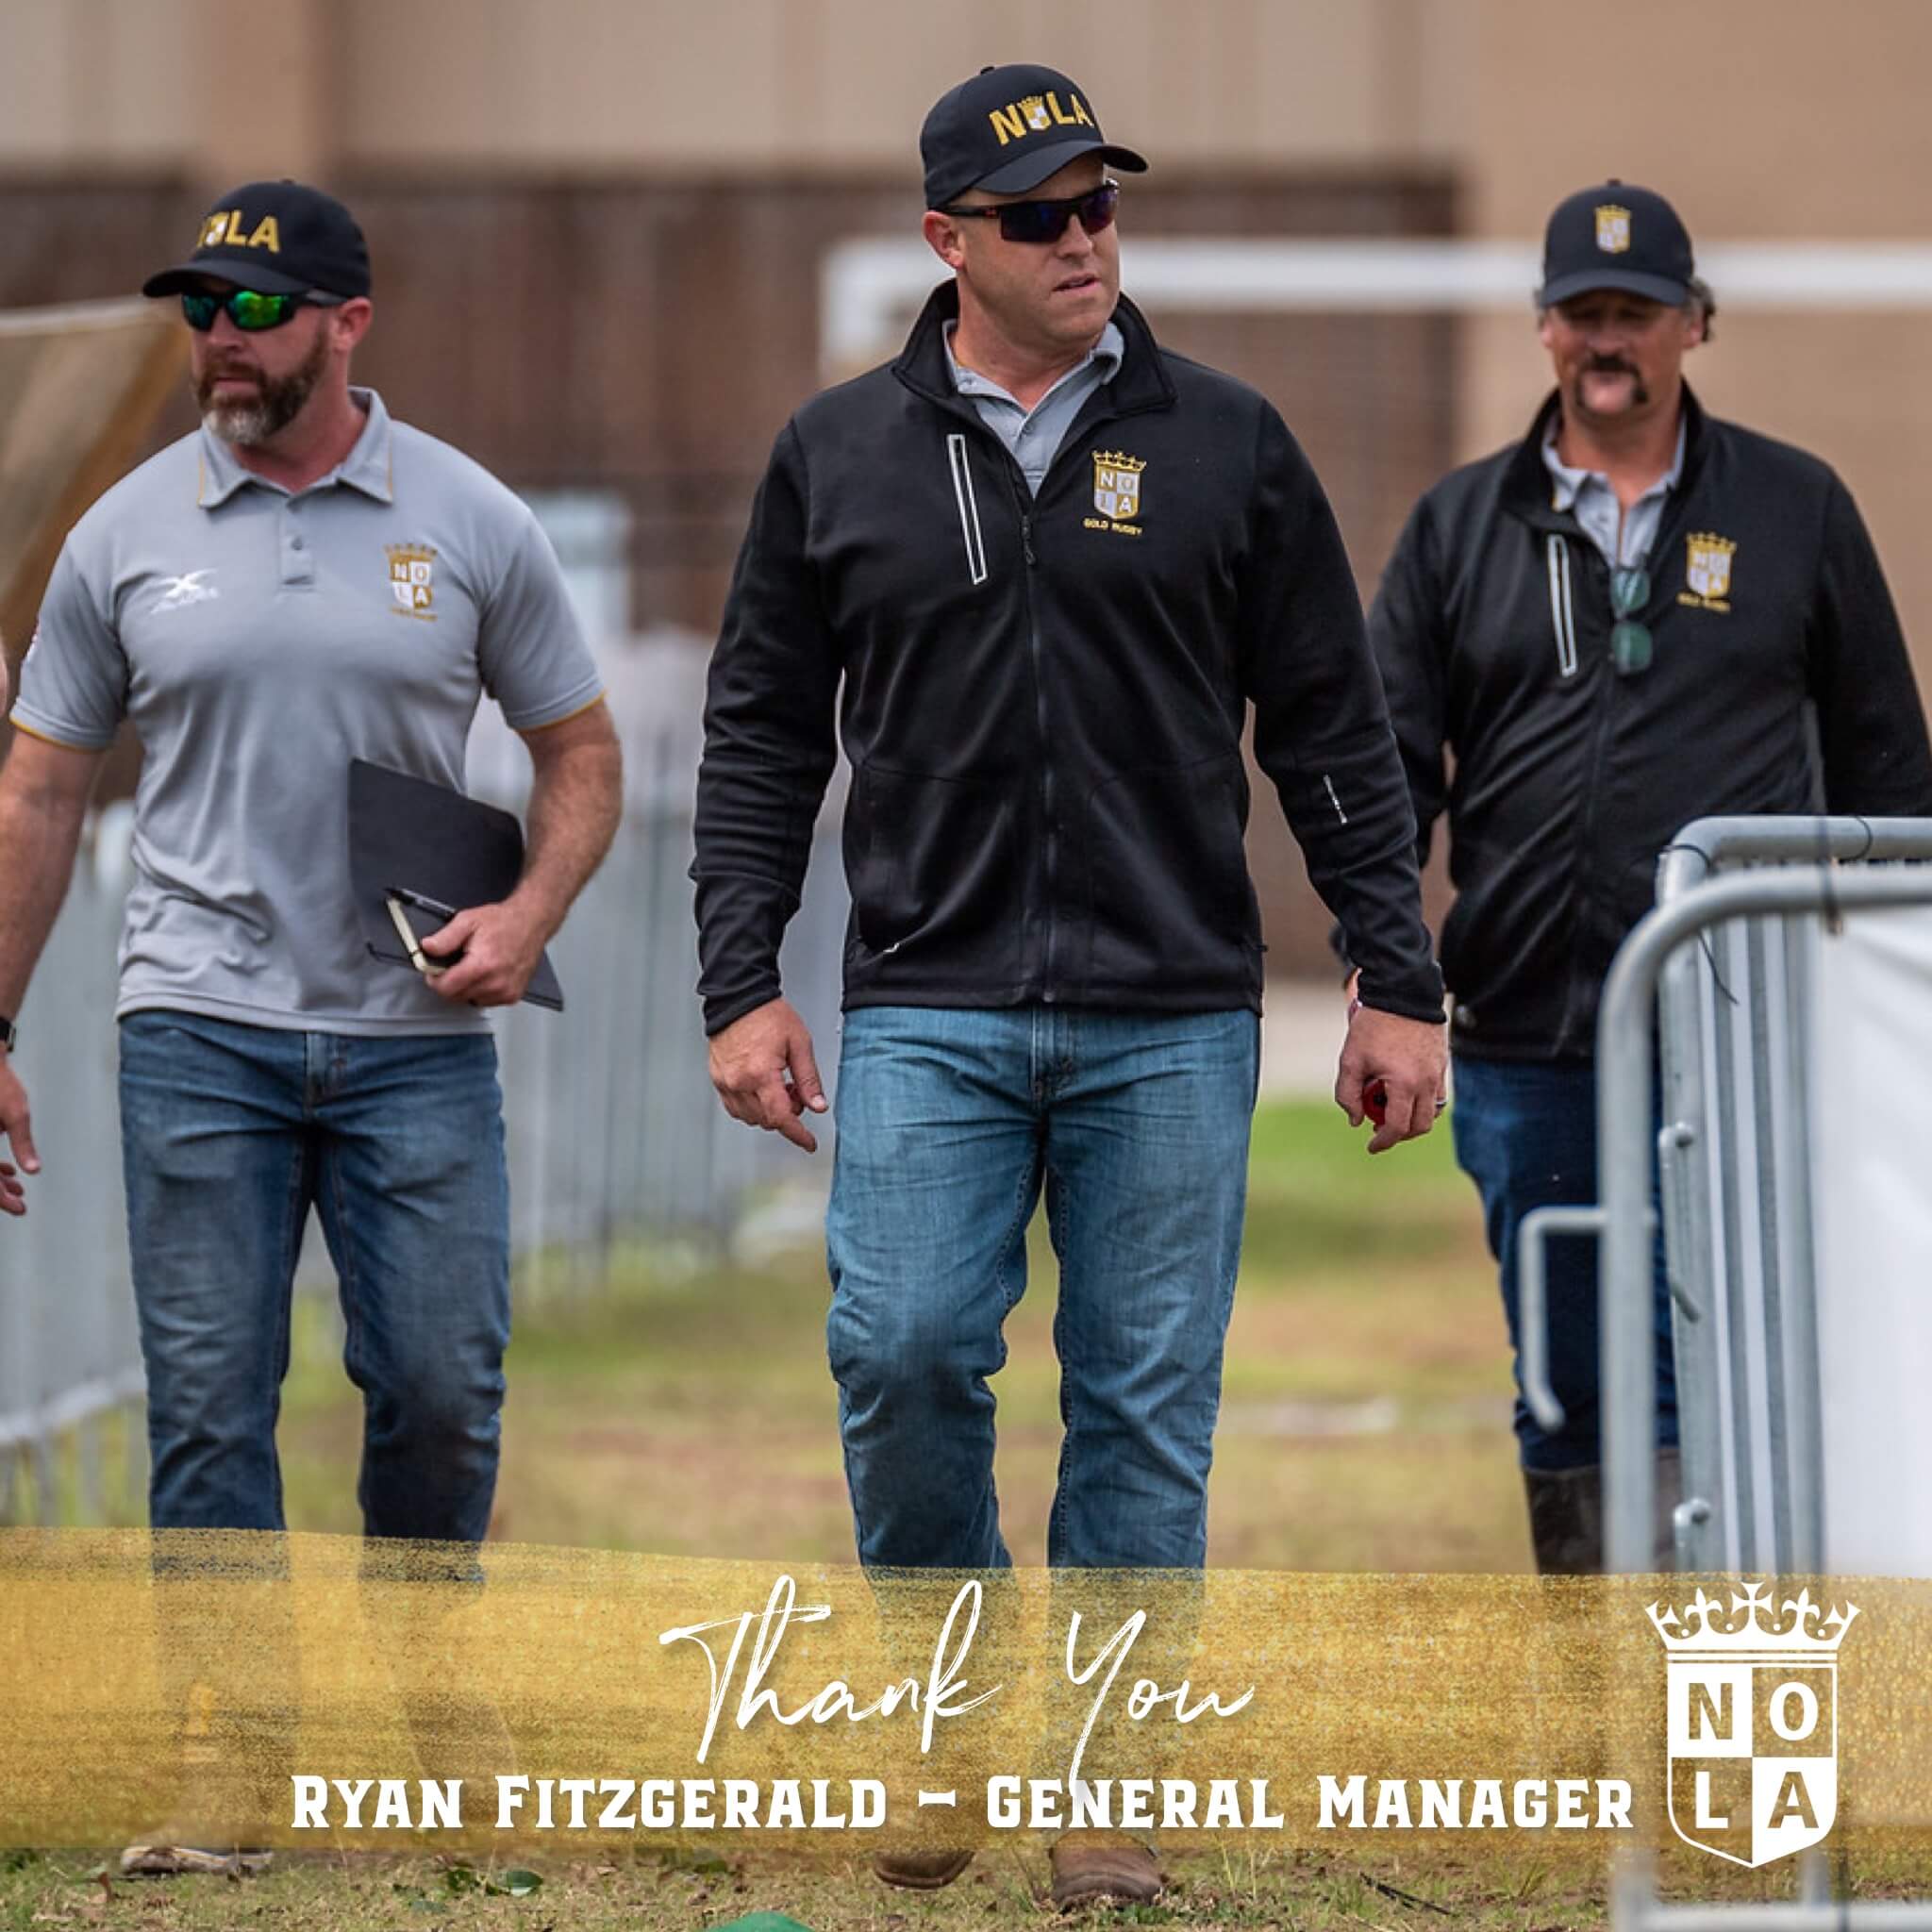 Thank you from our GM Ryan Fitzgerald